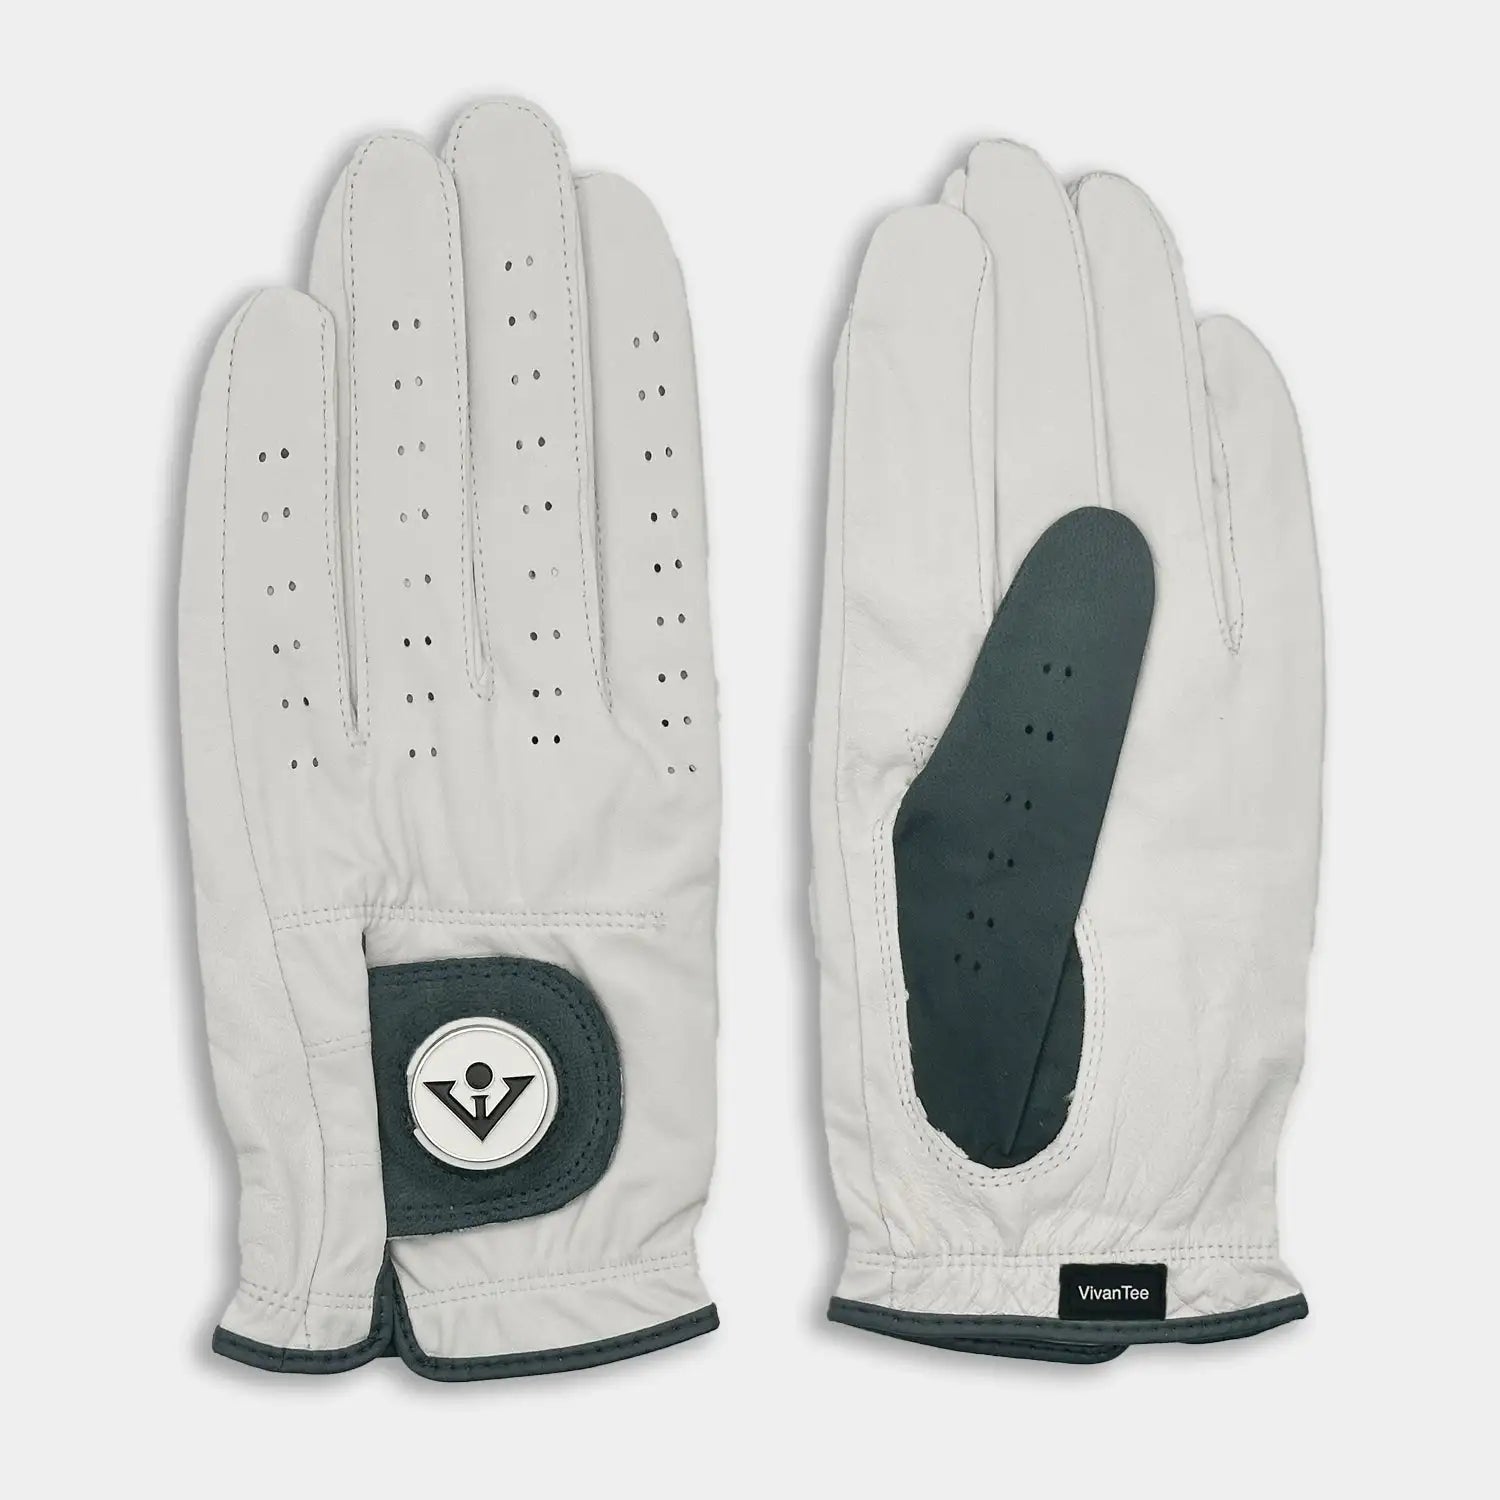 Stylish golf gloves with charcoal and white colored palette. Men's Grey Golf Gloves.